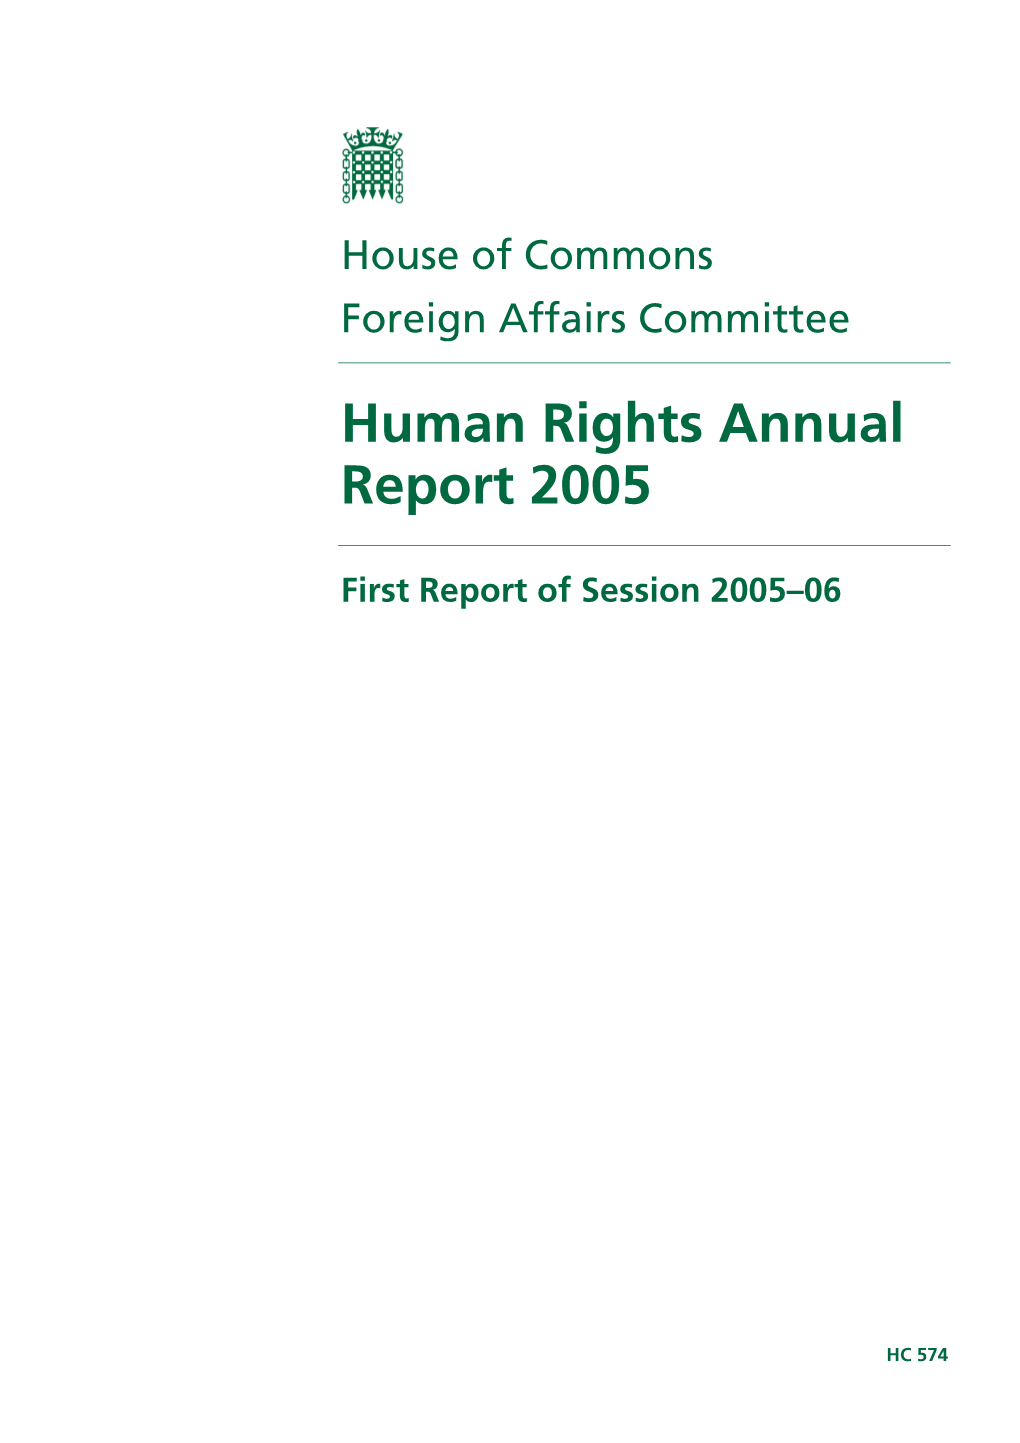 Human Rights Annual Report 2005